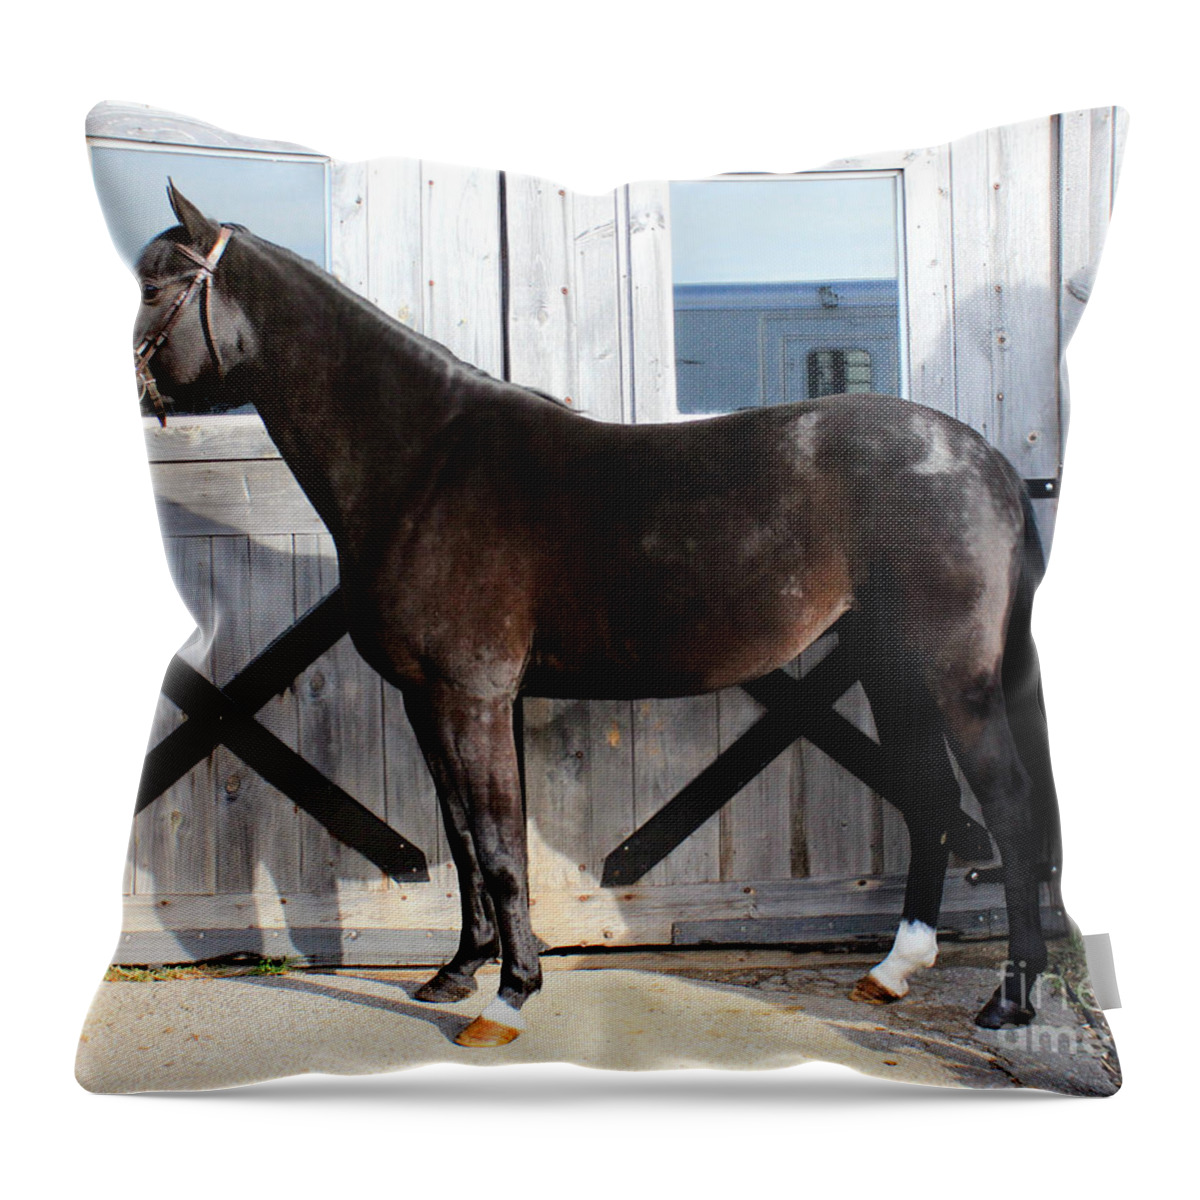  Throw Pillow featuring the photograph Sidney Lola 5 by Life With Horses